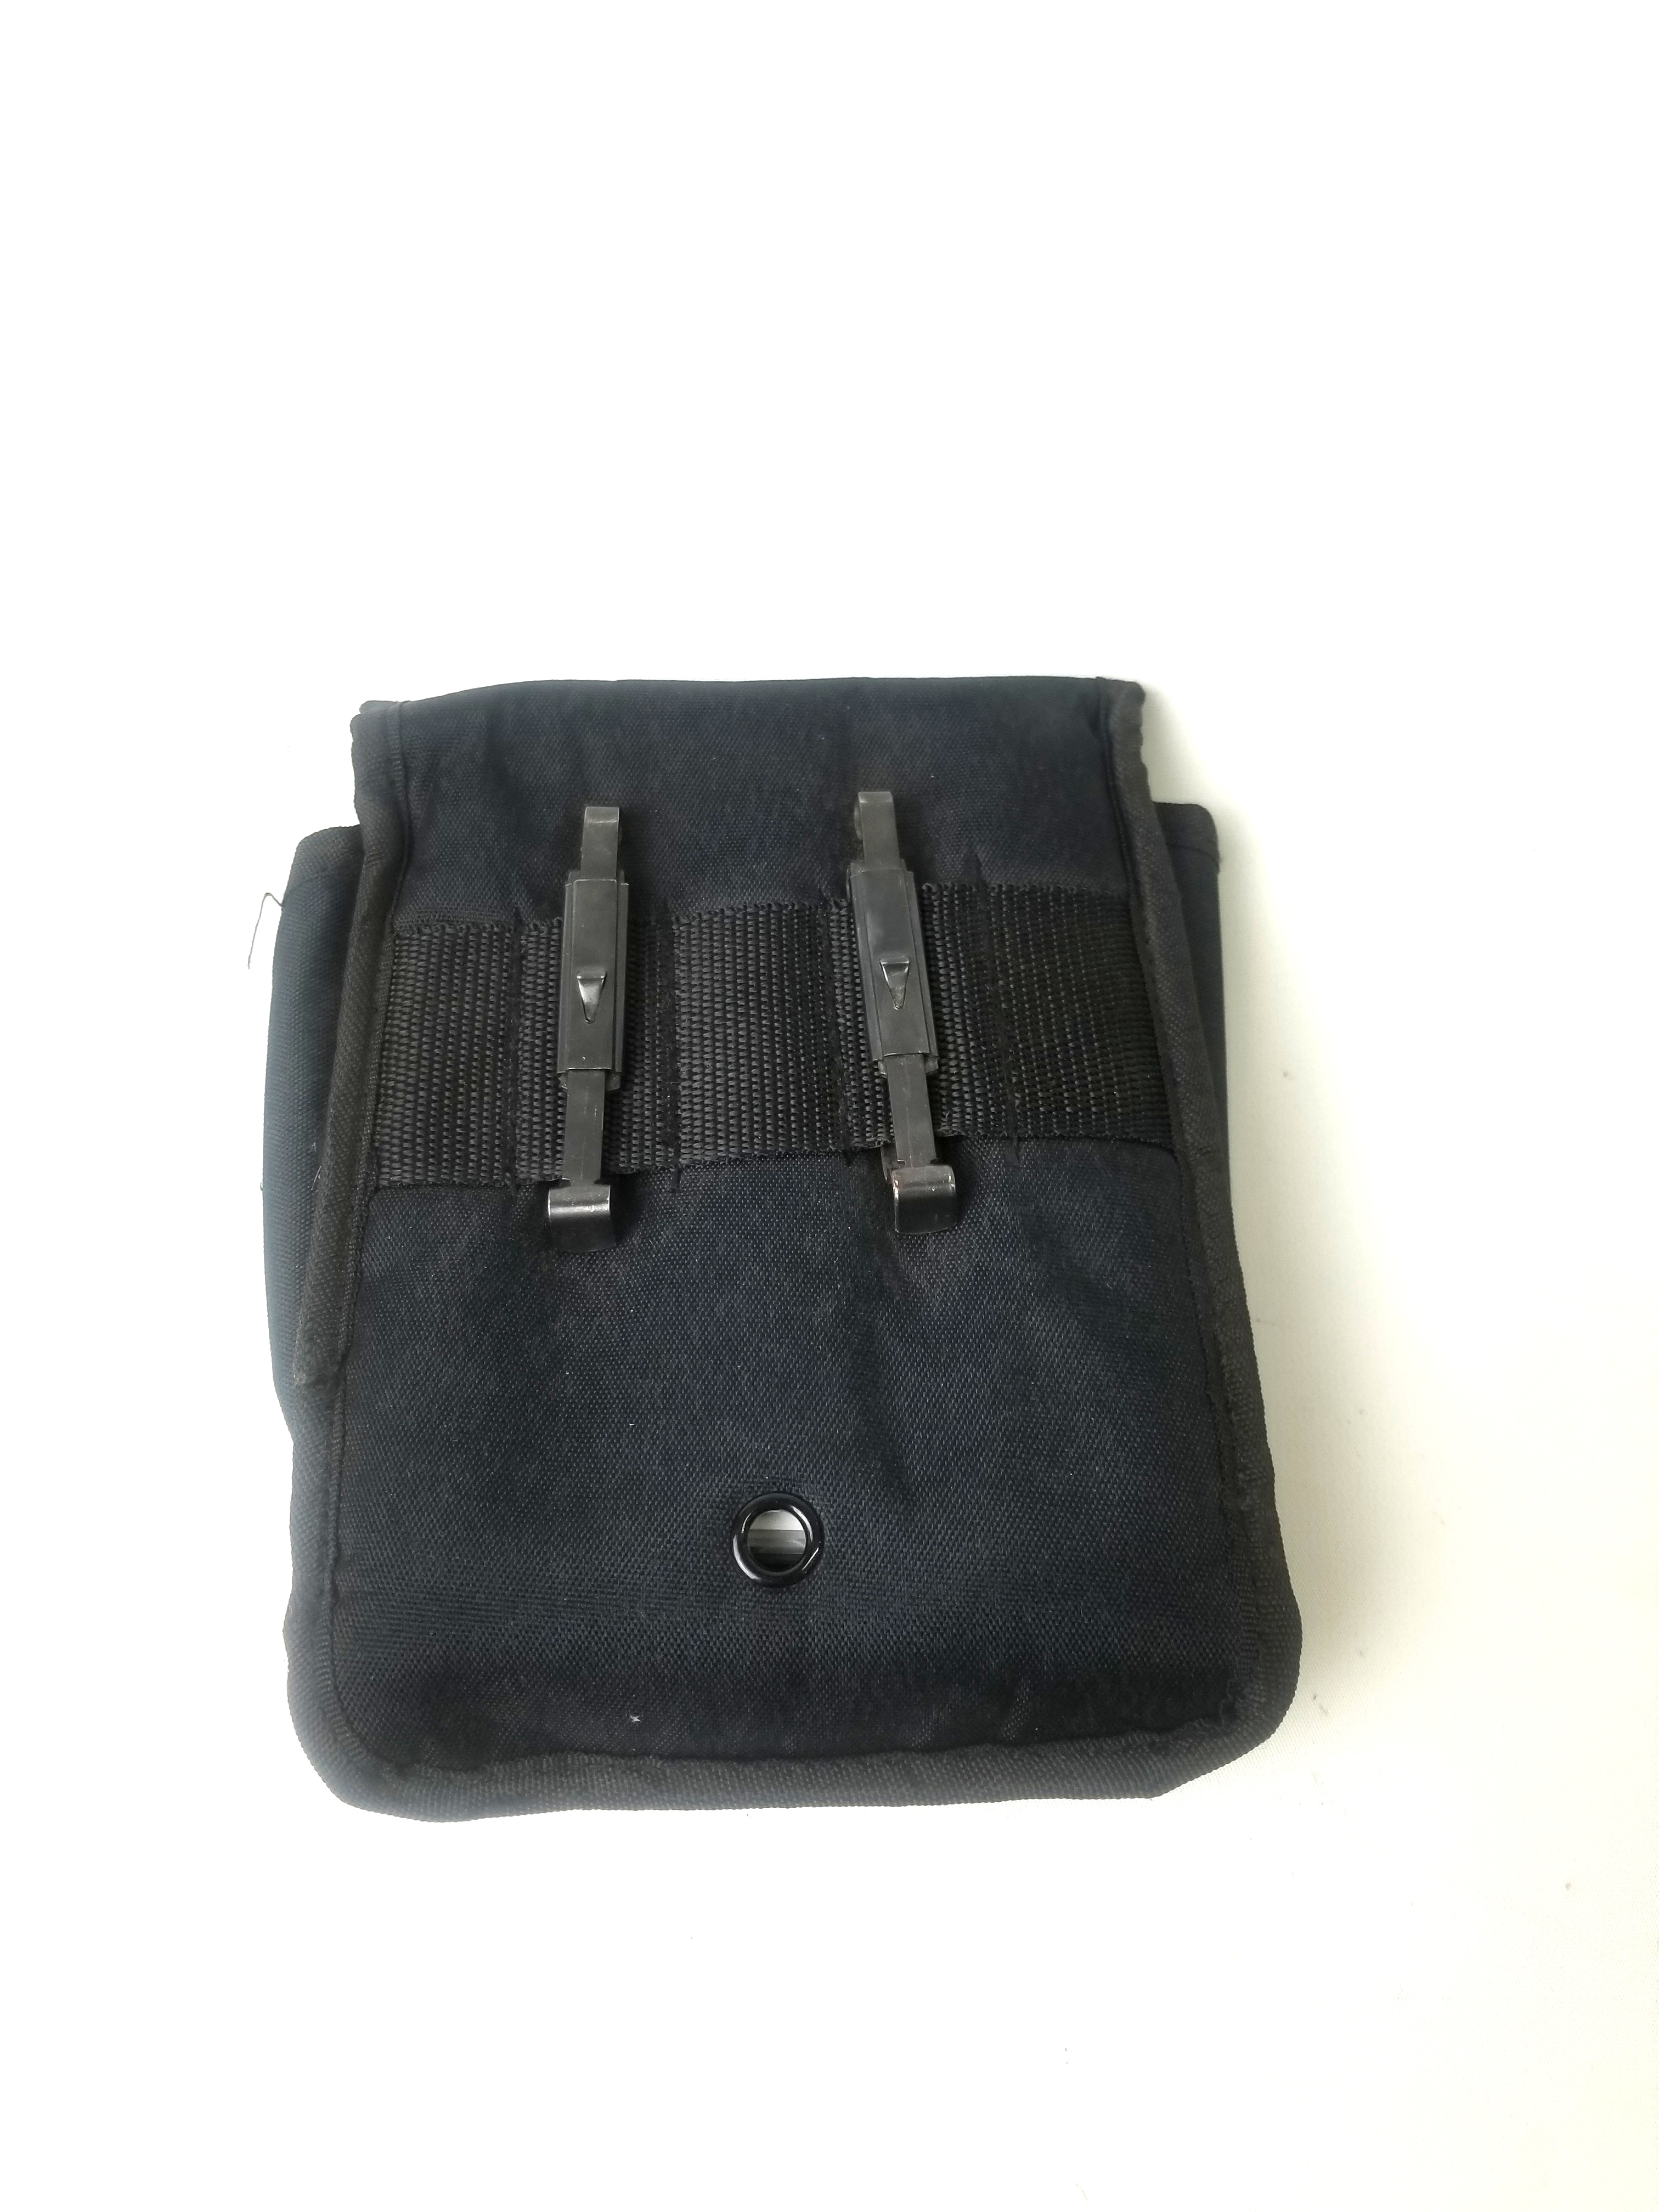 Black Rugged Pouch with Velcro Closure - MOD Armory